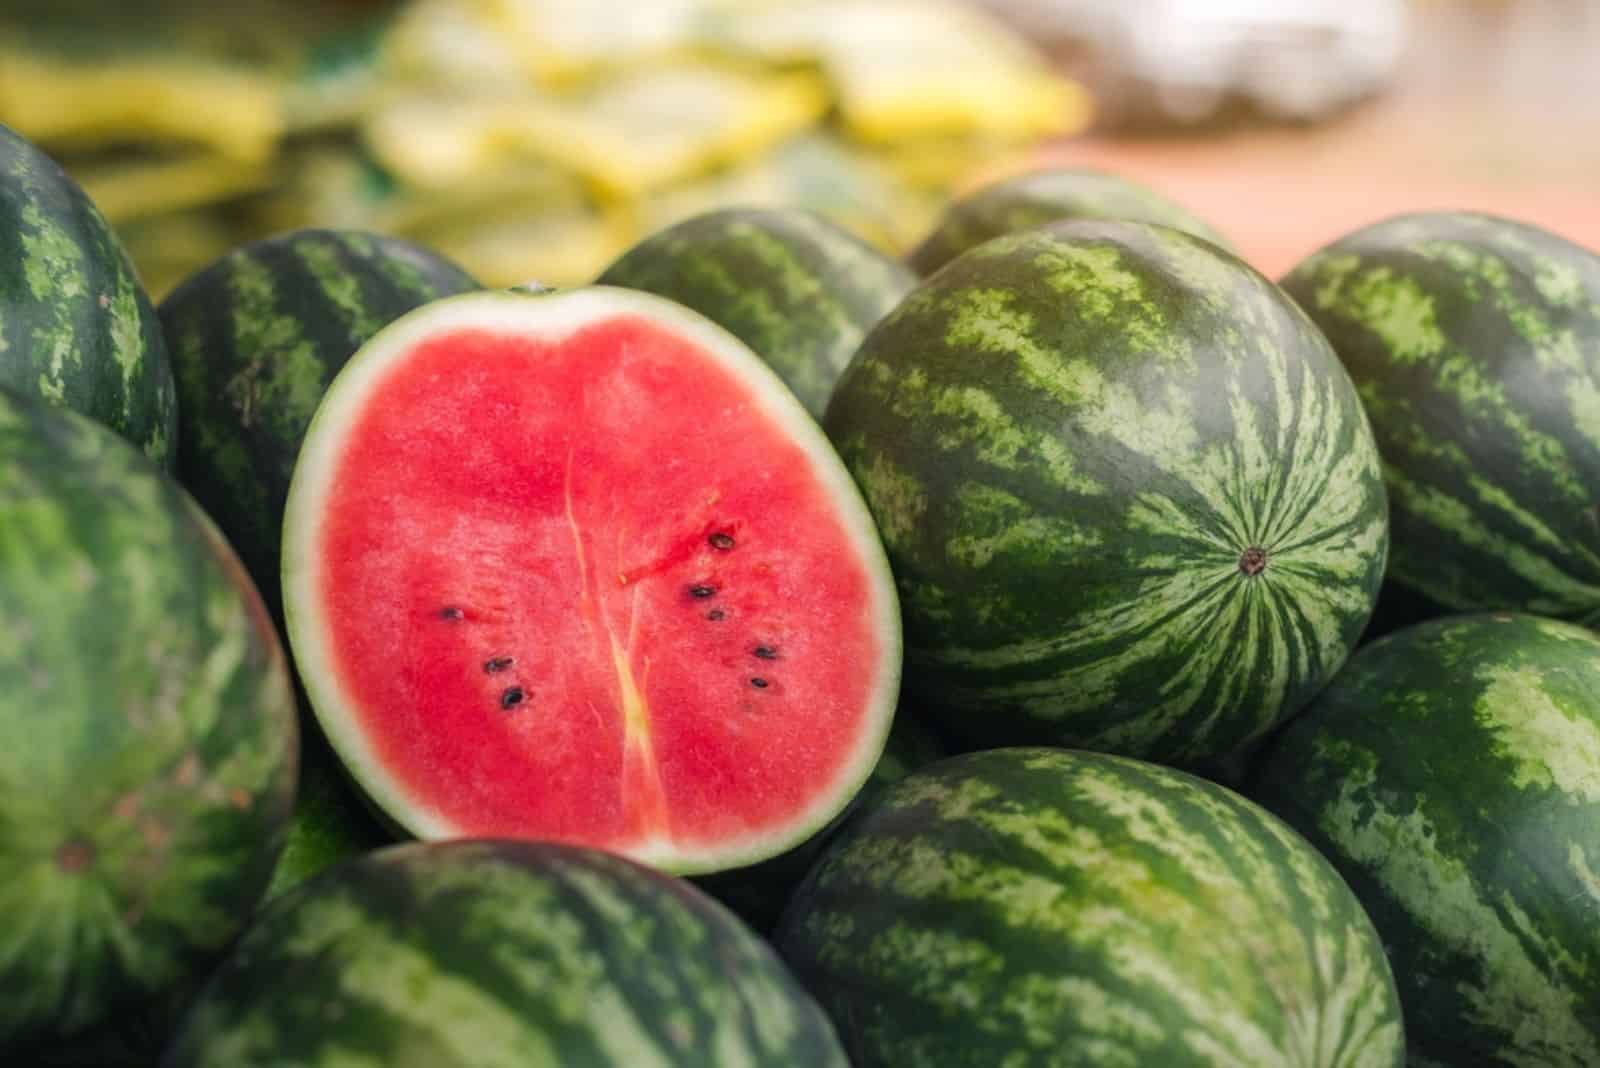 Several large sweet green watermelons and cut watermelons